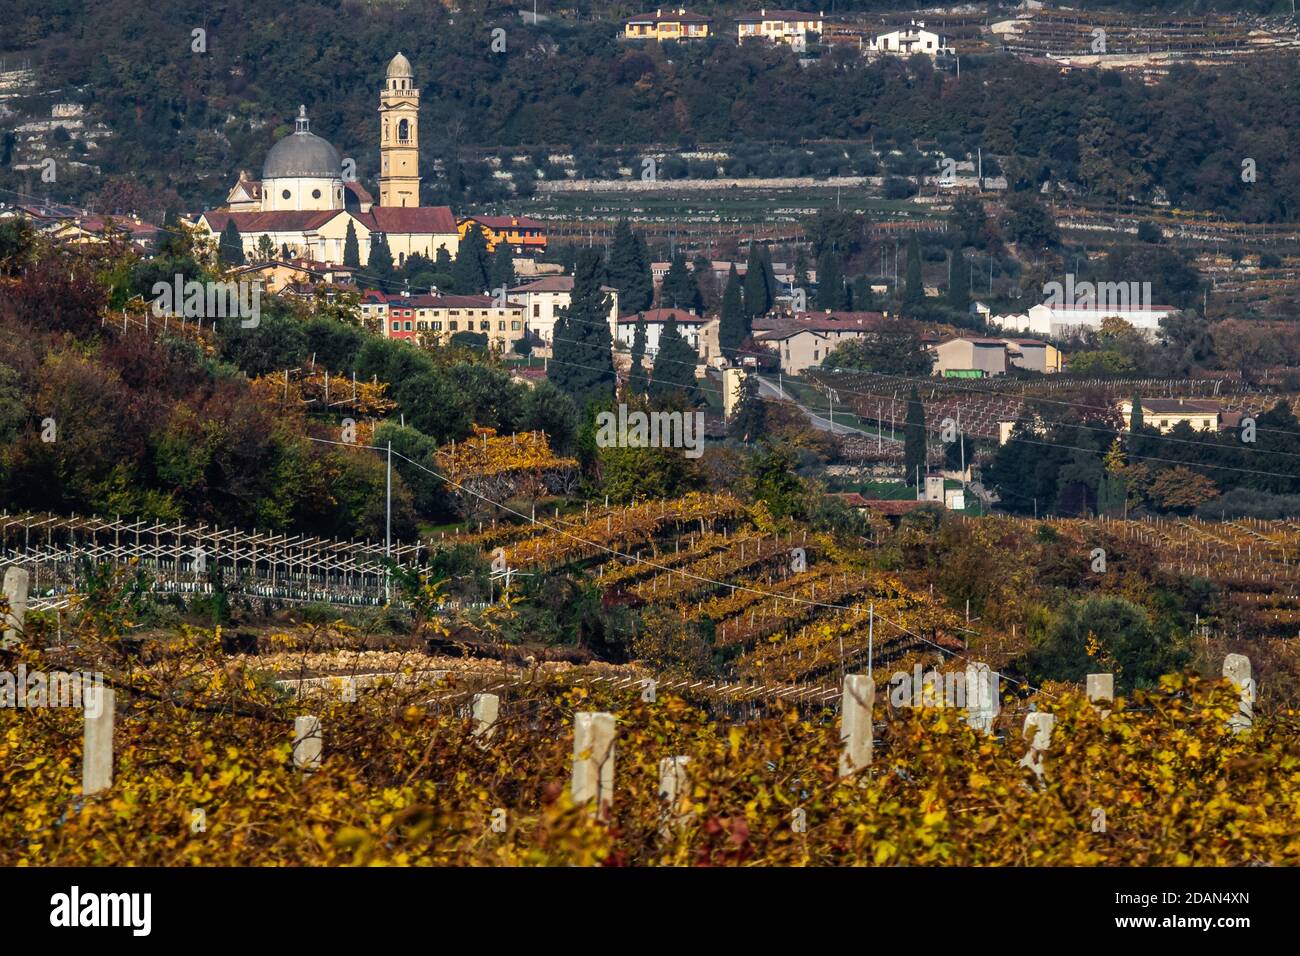 Marano di Valpolicella, surrounded by typical vineyards. Stock Photo